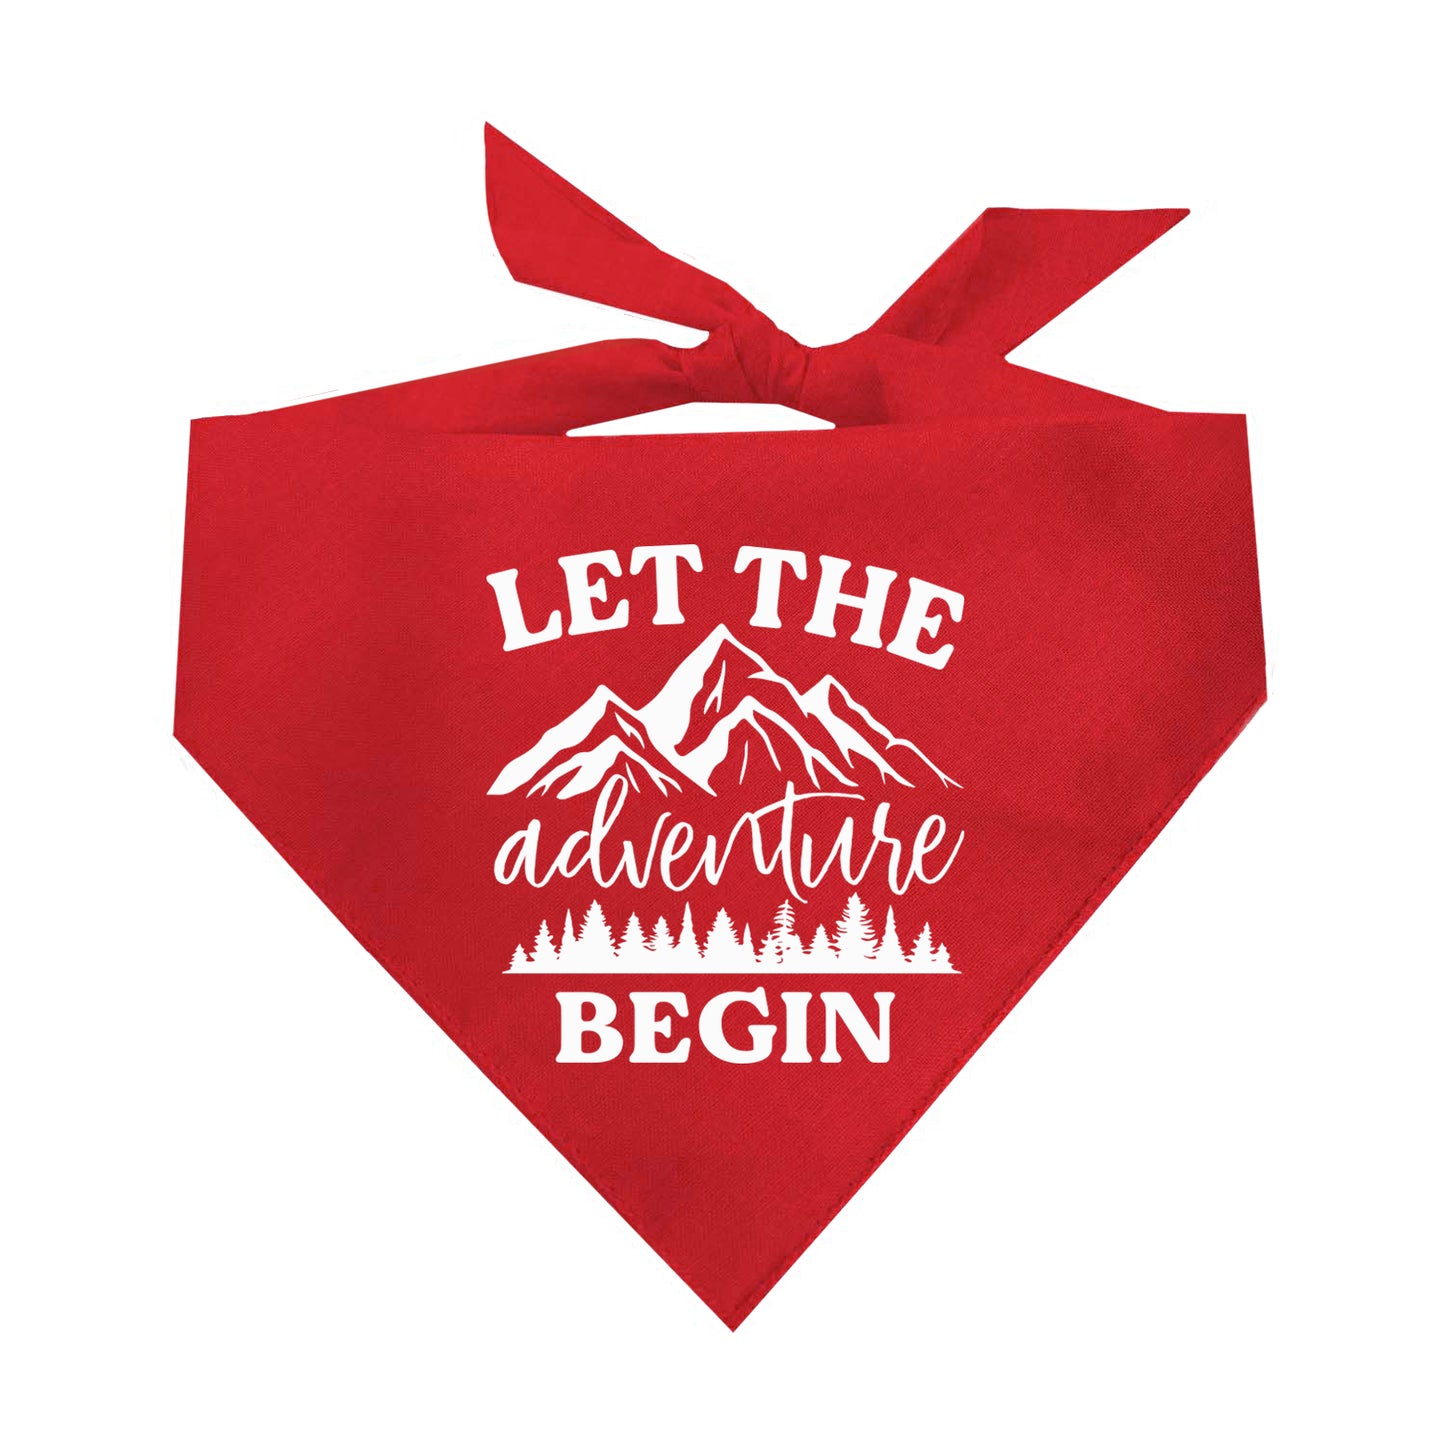 Let The Adventure Begin Triangle Dog Bandana (Assorted Colors)